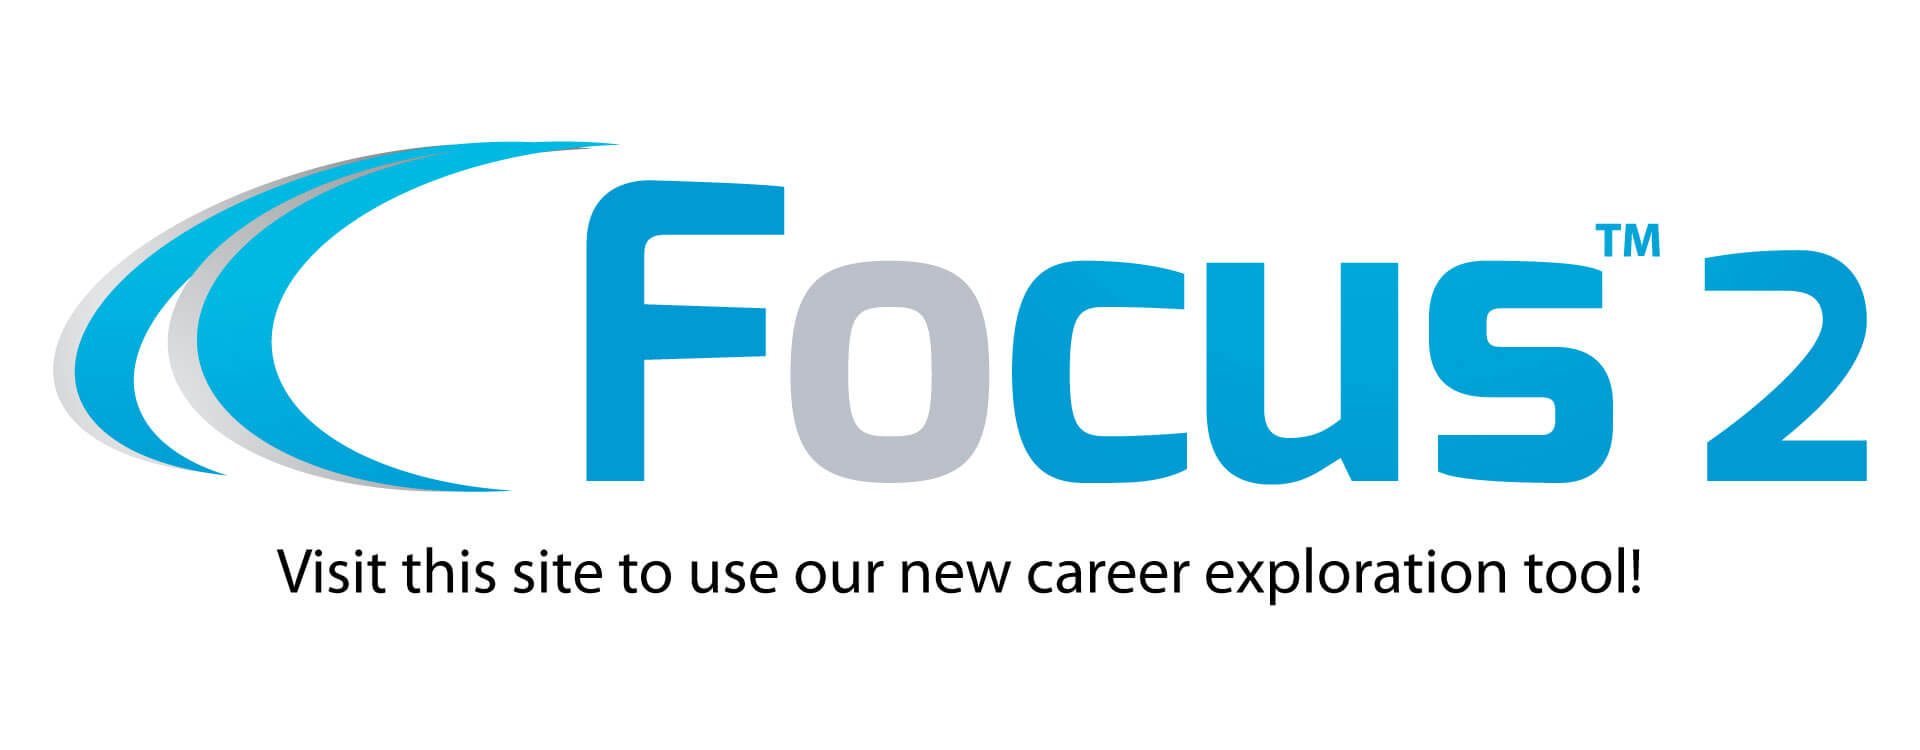 Focus2: click here to visit the site and use our new career exploration tool!